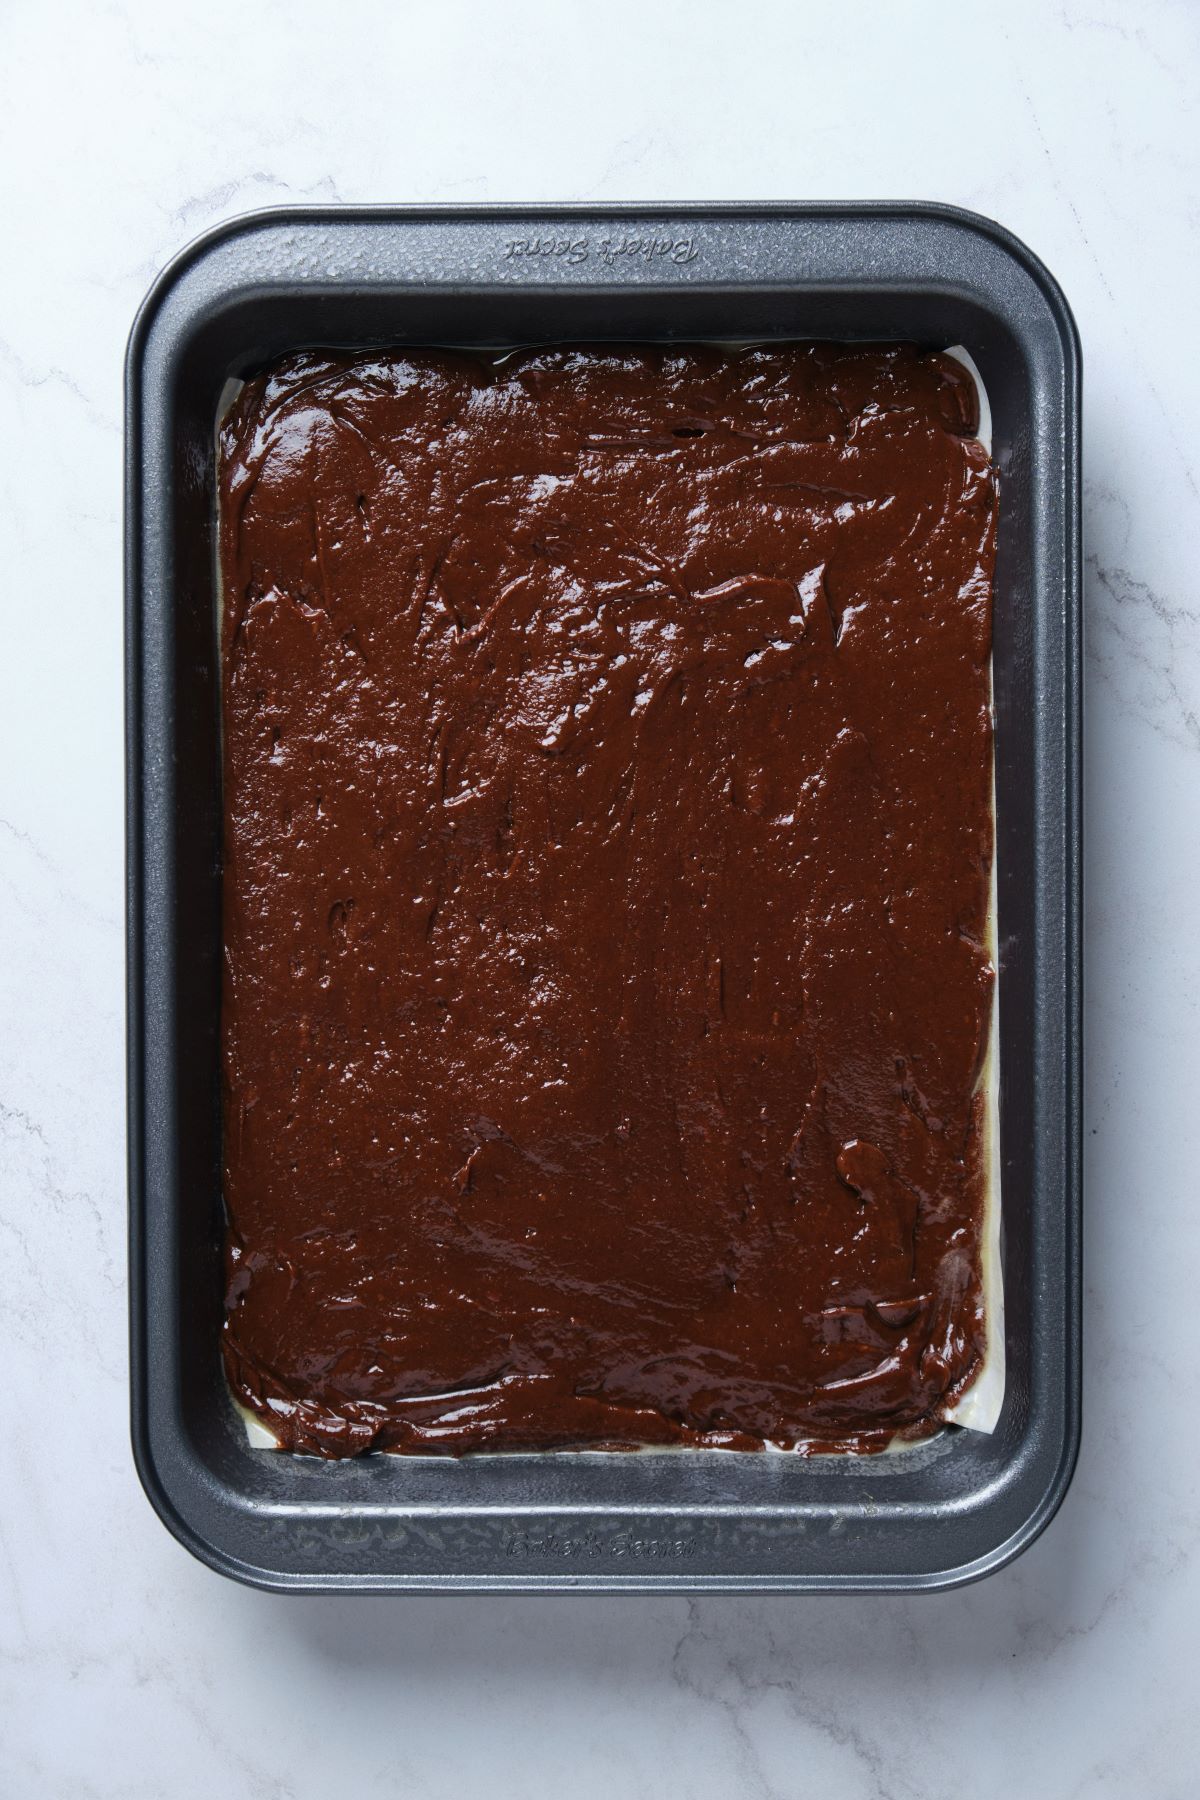 The chocolate fudge cake batter spread into a cake pan.